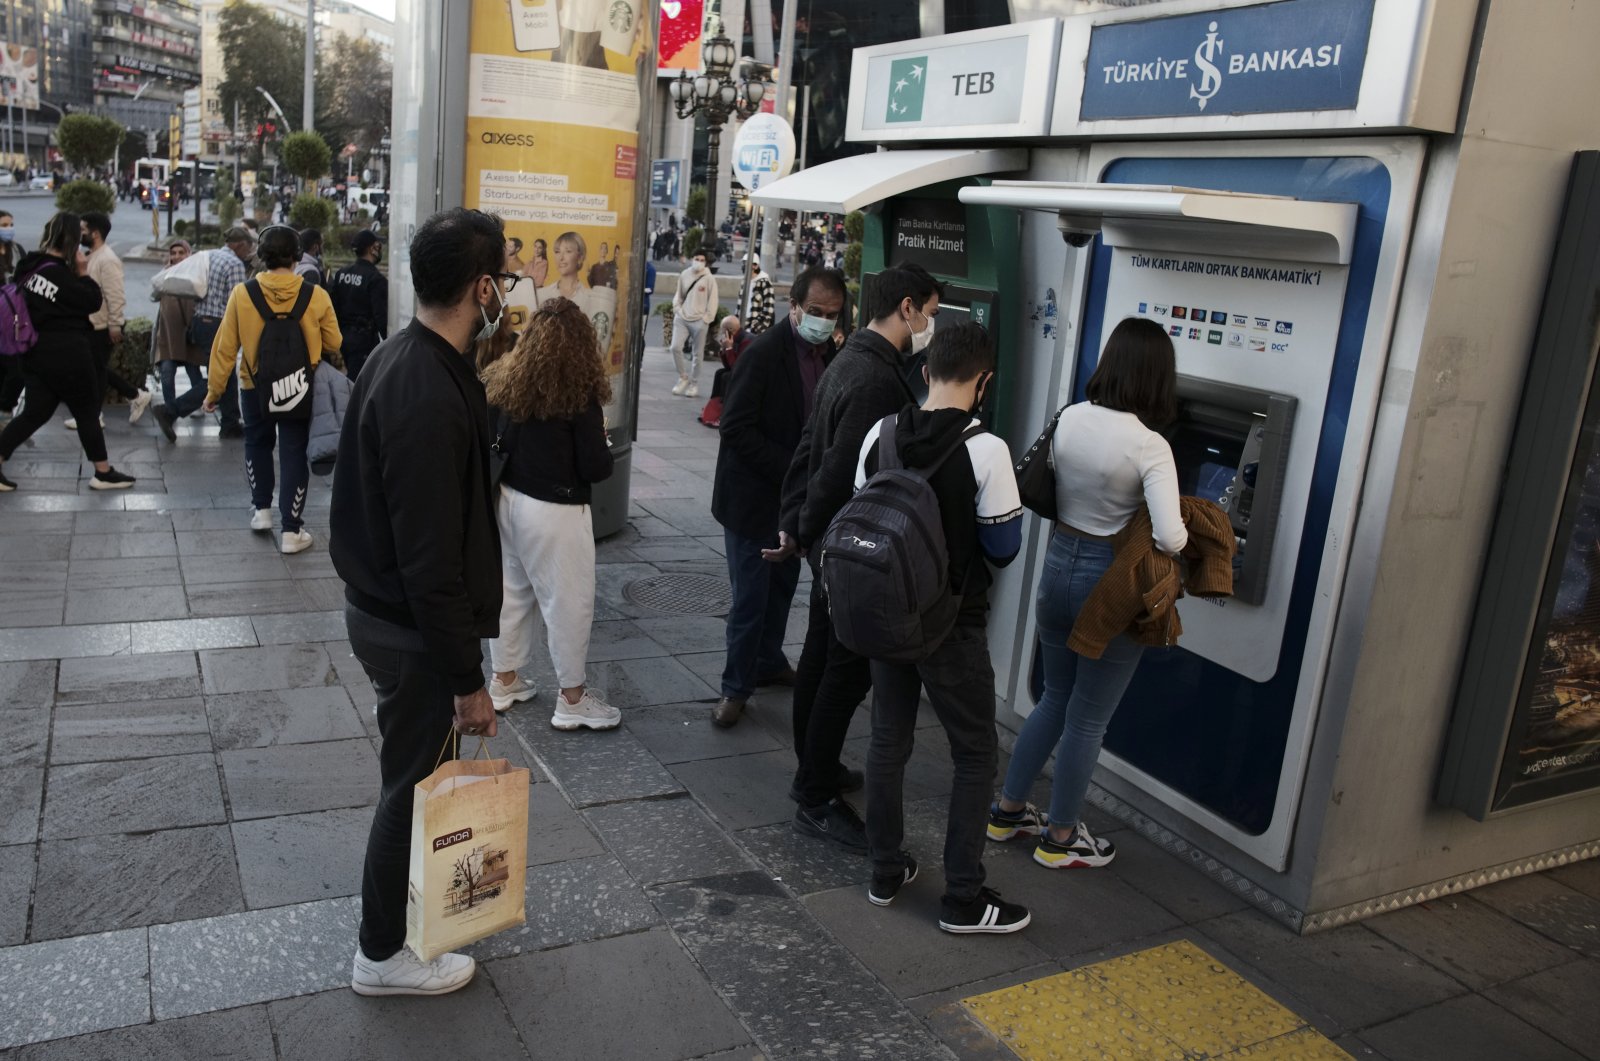 People line up to retrieve money from a bank ATM in the capital, Ankara, Turkey, Oct. 22, 2021. (AP Photo)